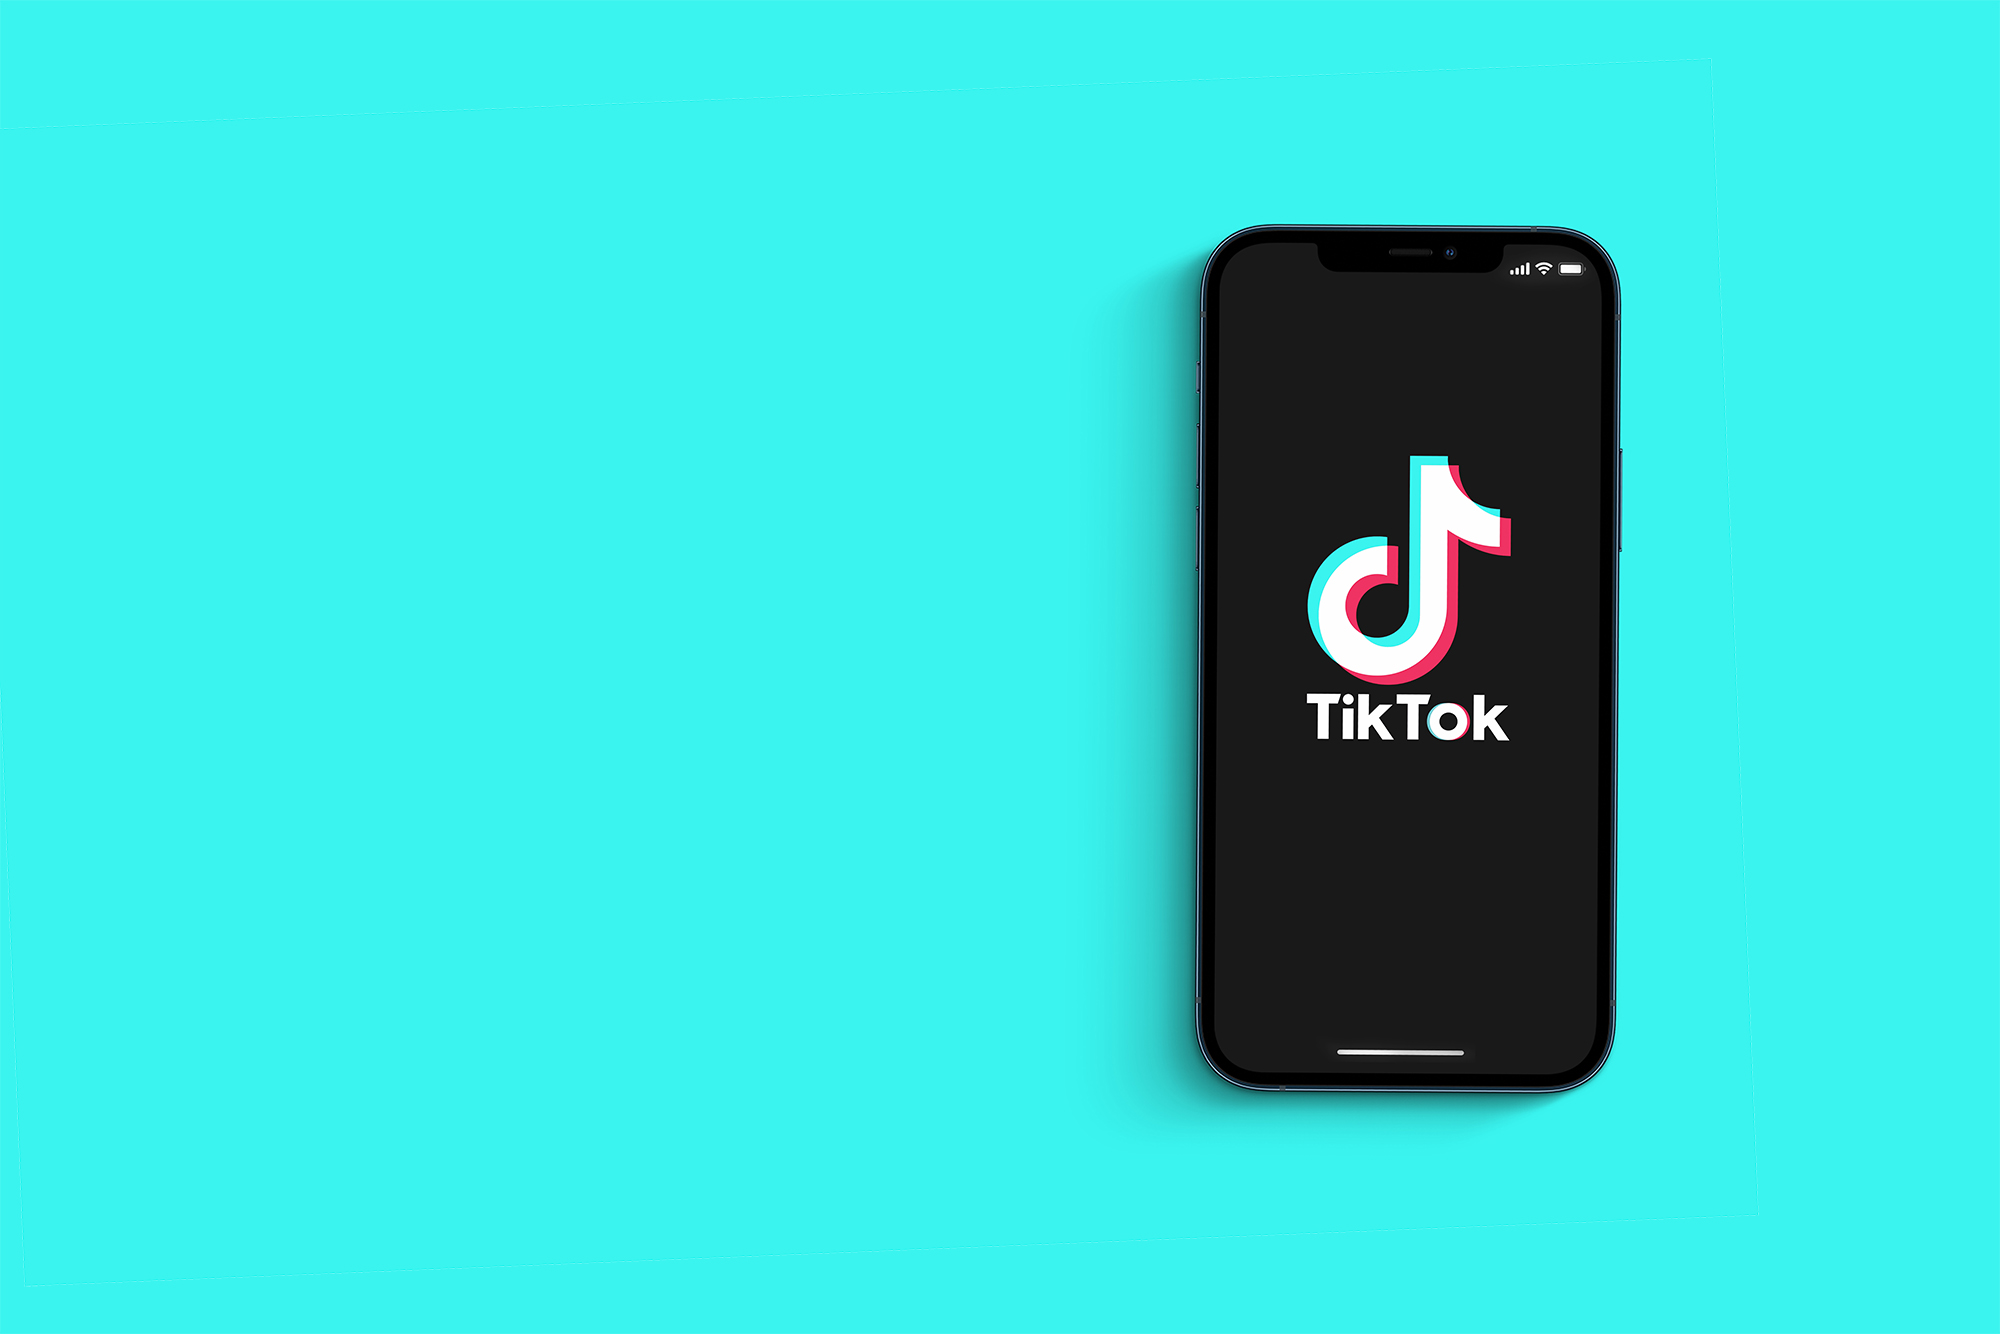 What is the Impact of TikTok on Digital Marketing in Today’s World?